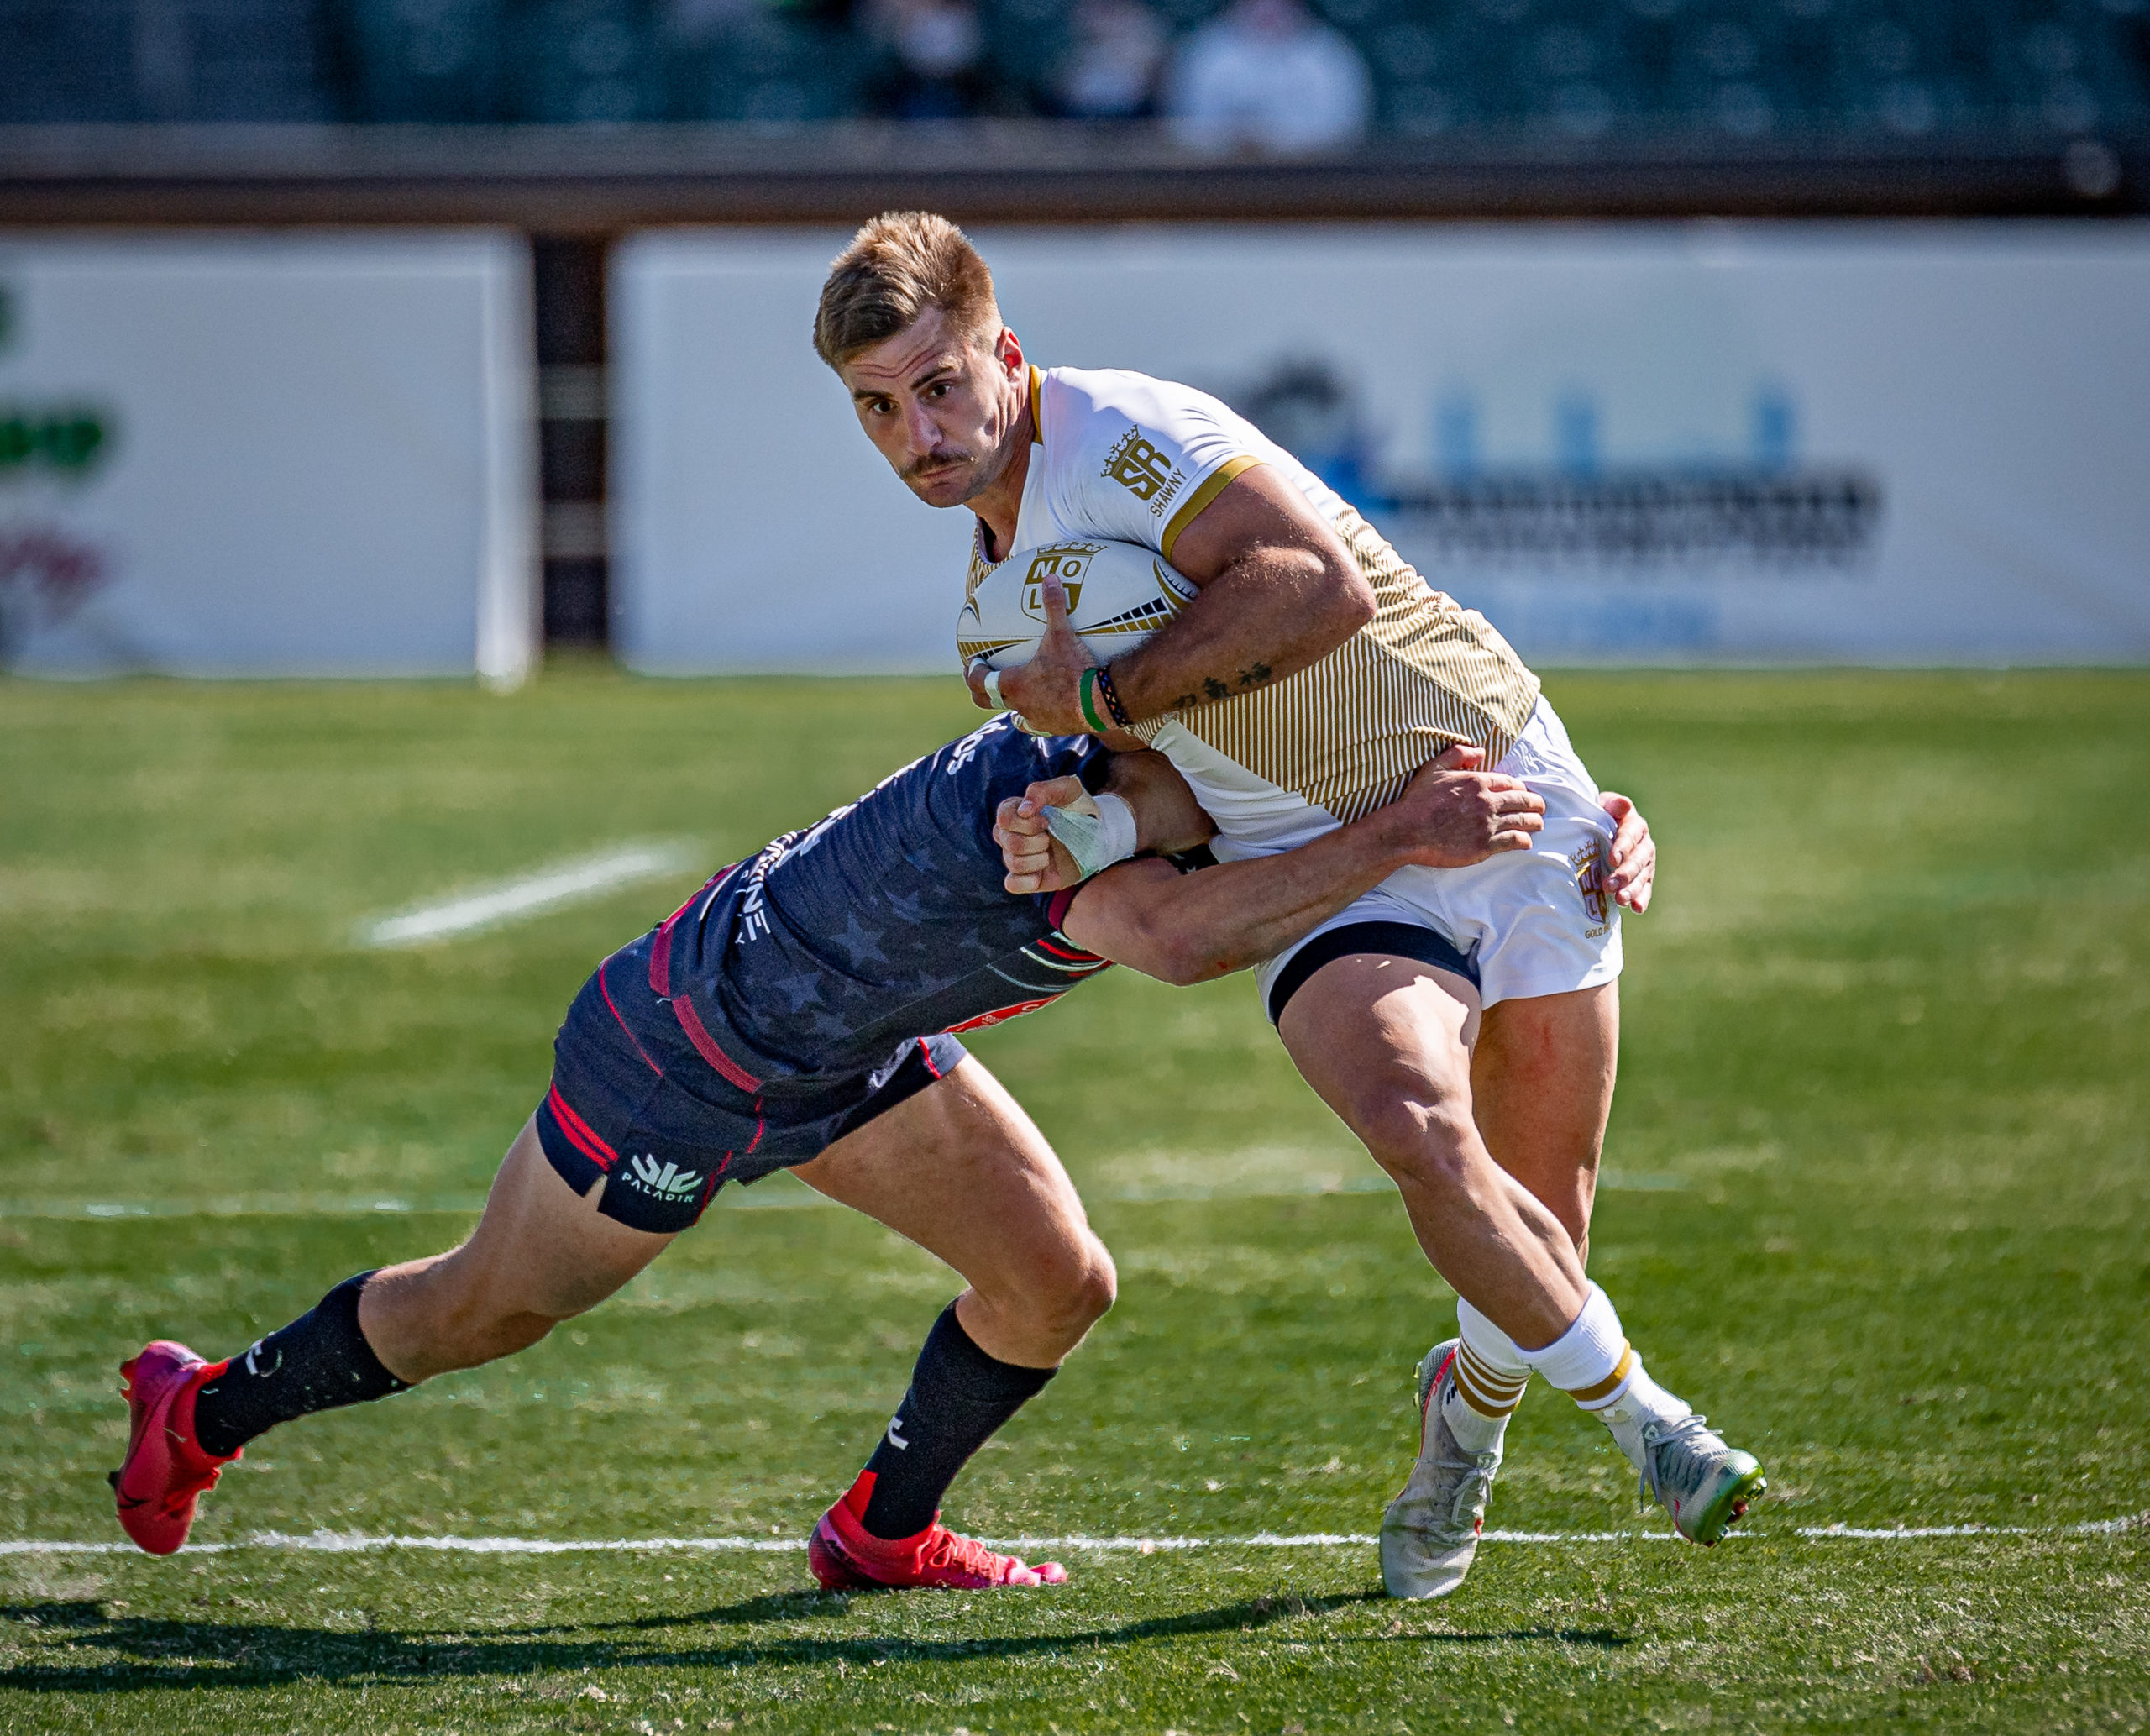 MAJOR LEAGUE RUGBY ANNOUNCES FIRST AND SECOND ALL-MLR TEAMS, AND HONORABLE MENTION